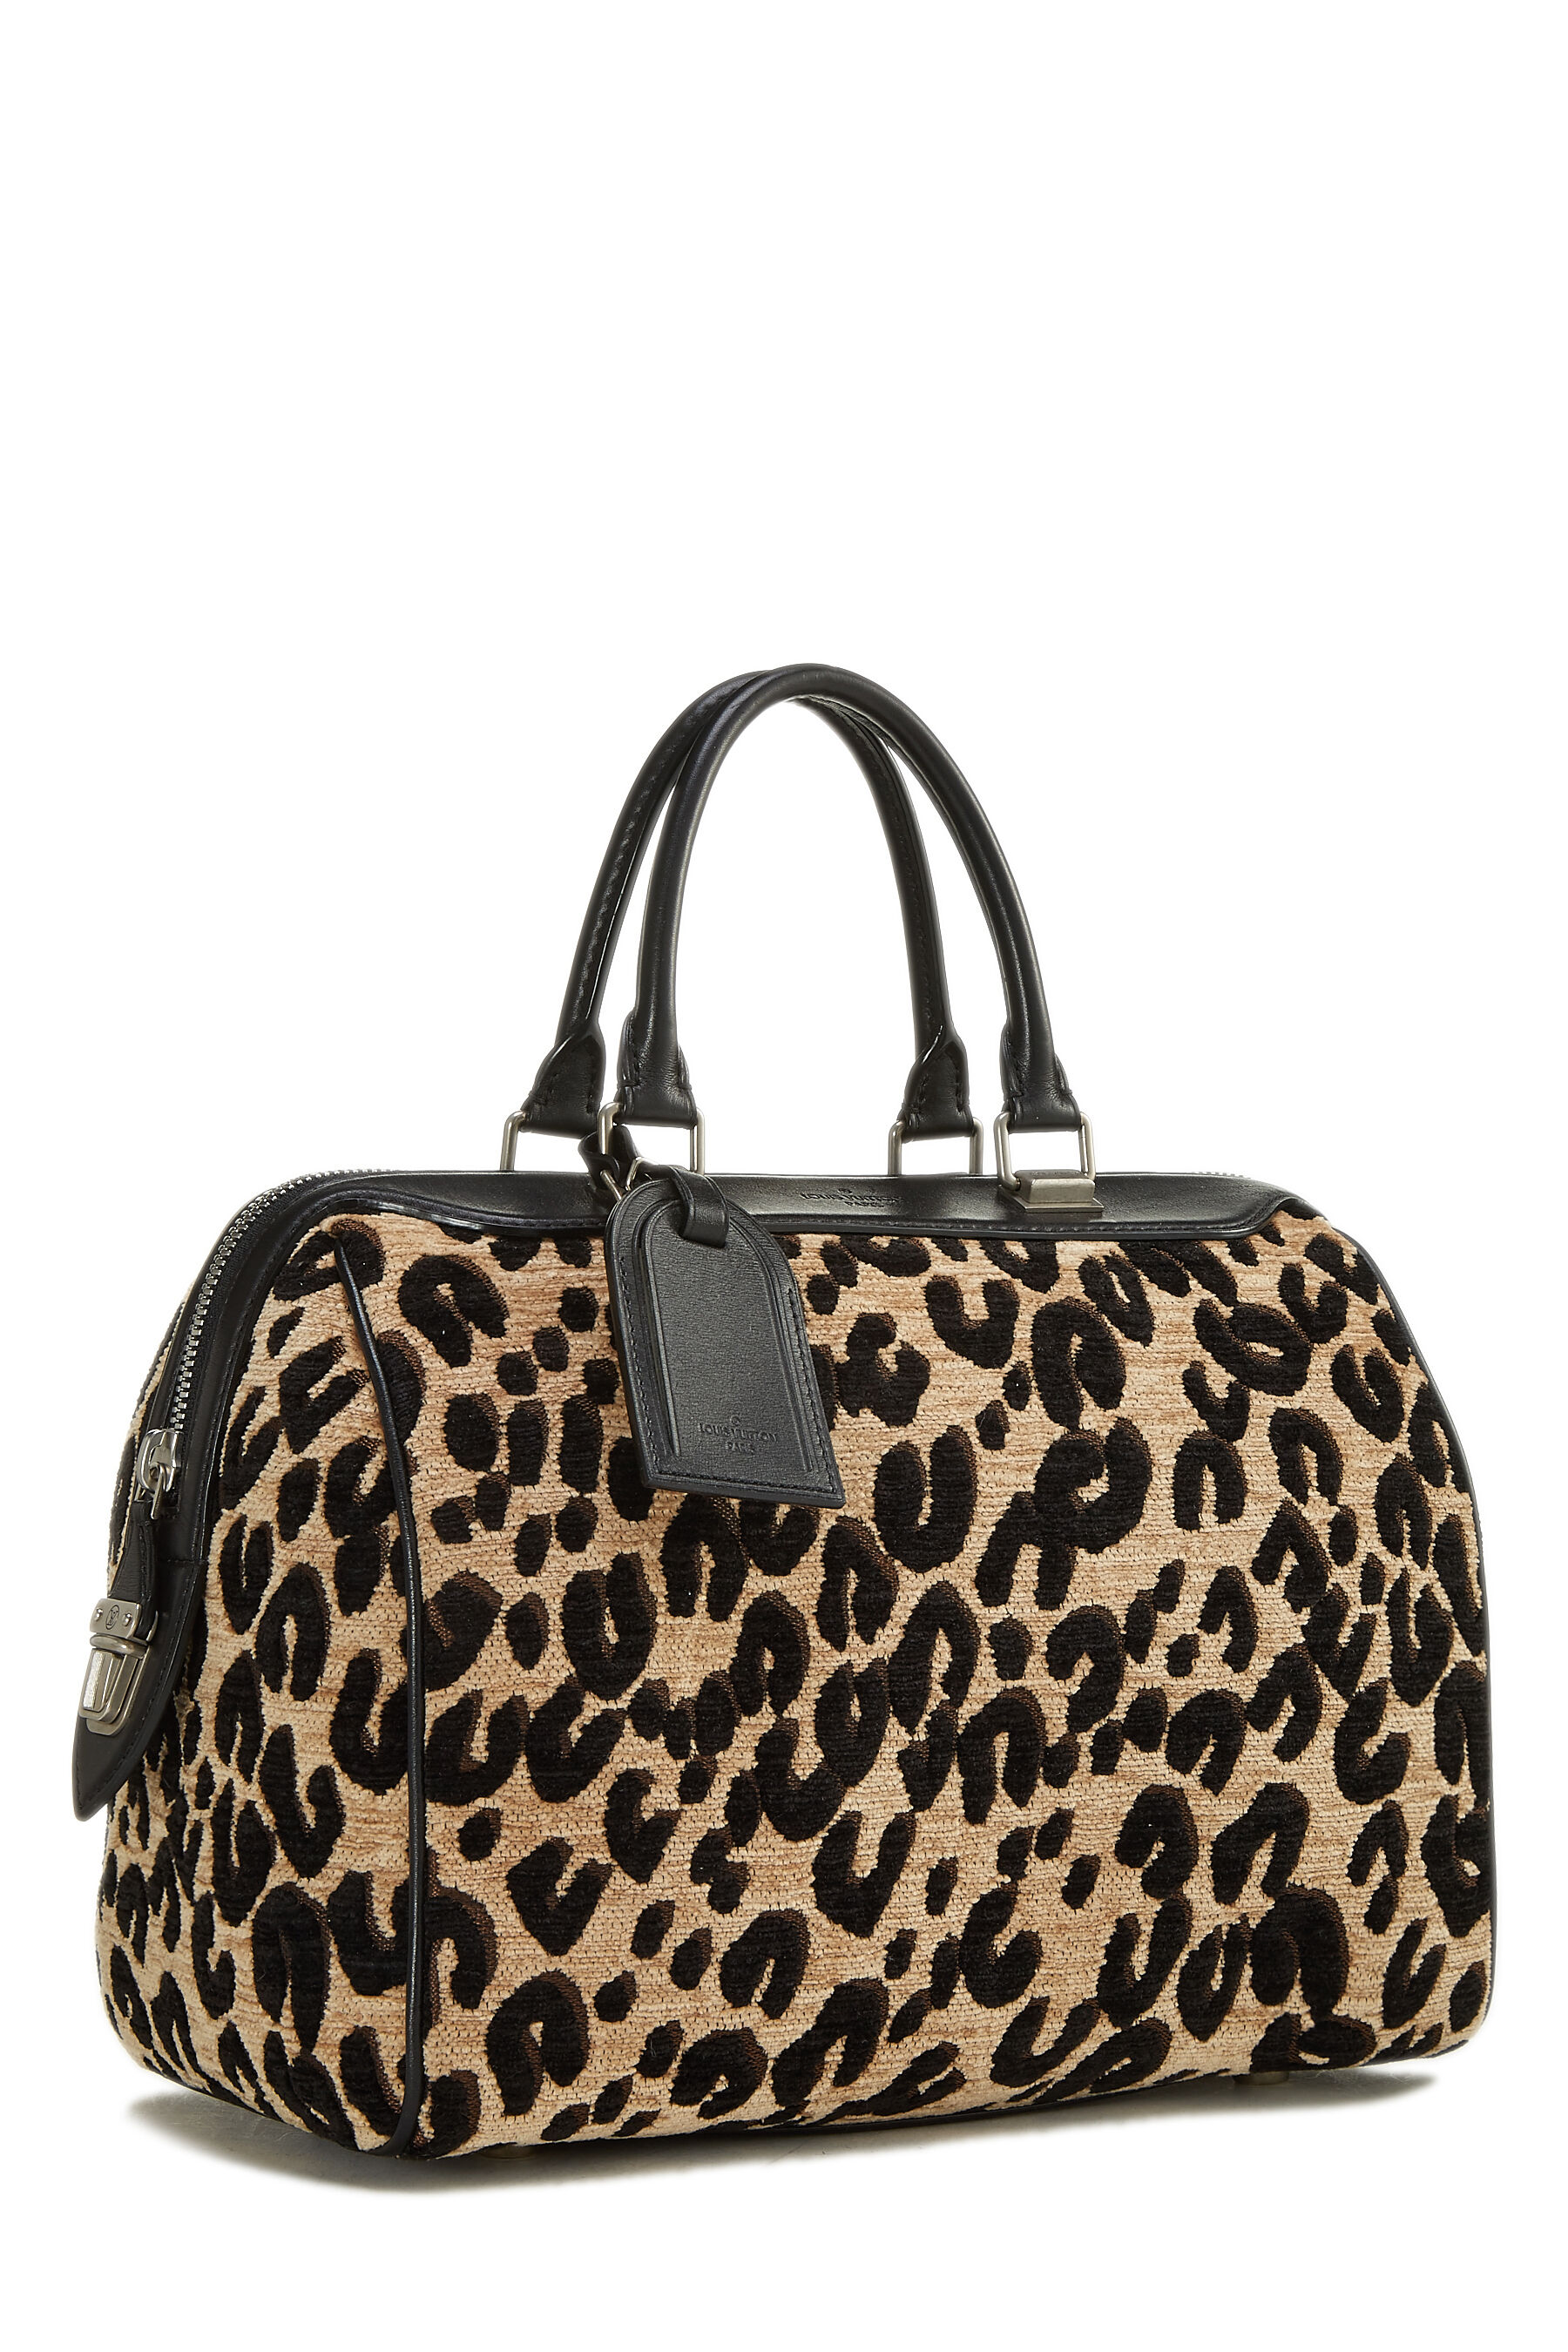 Louis Vuitton x Stephen Sprouse 2012 pre-owned North South Leopard